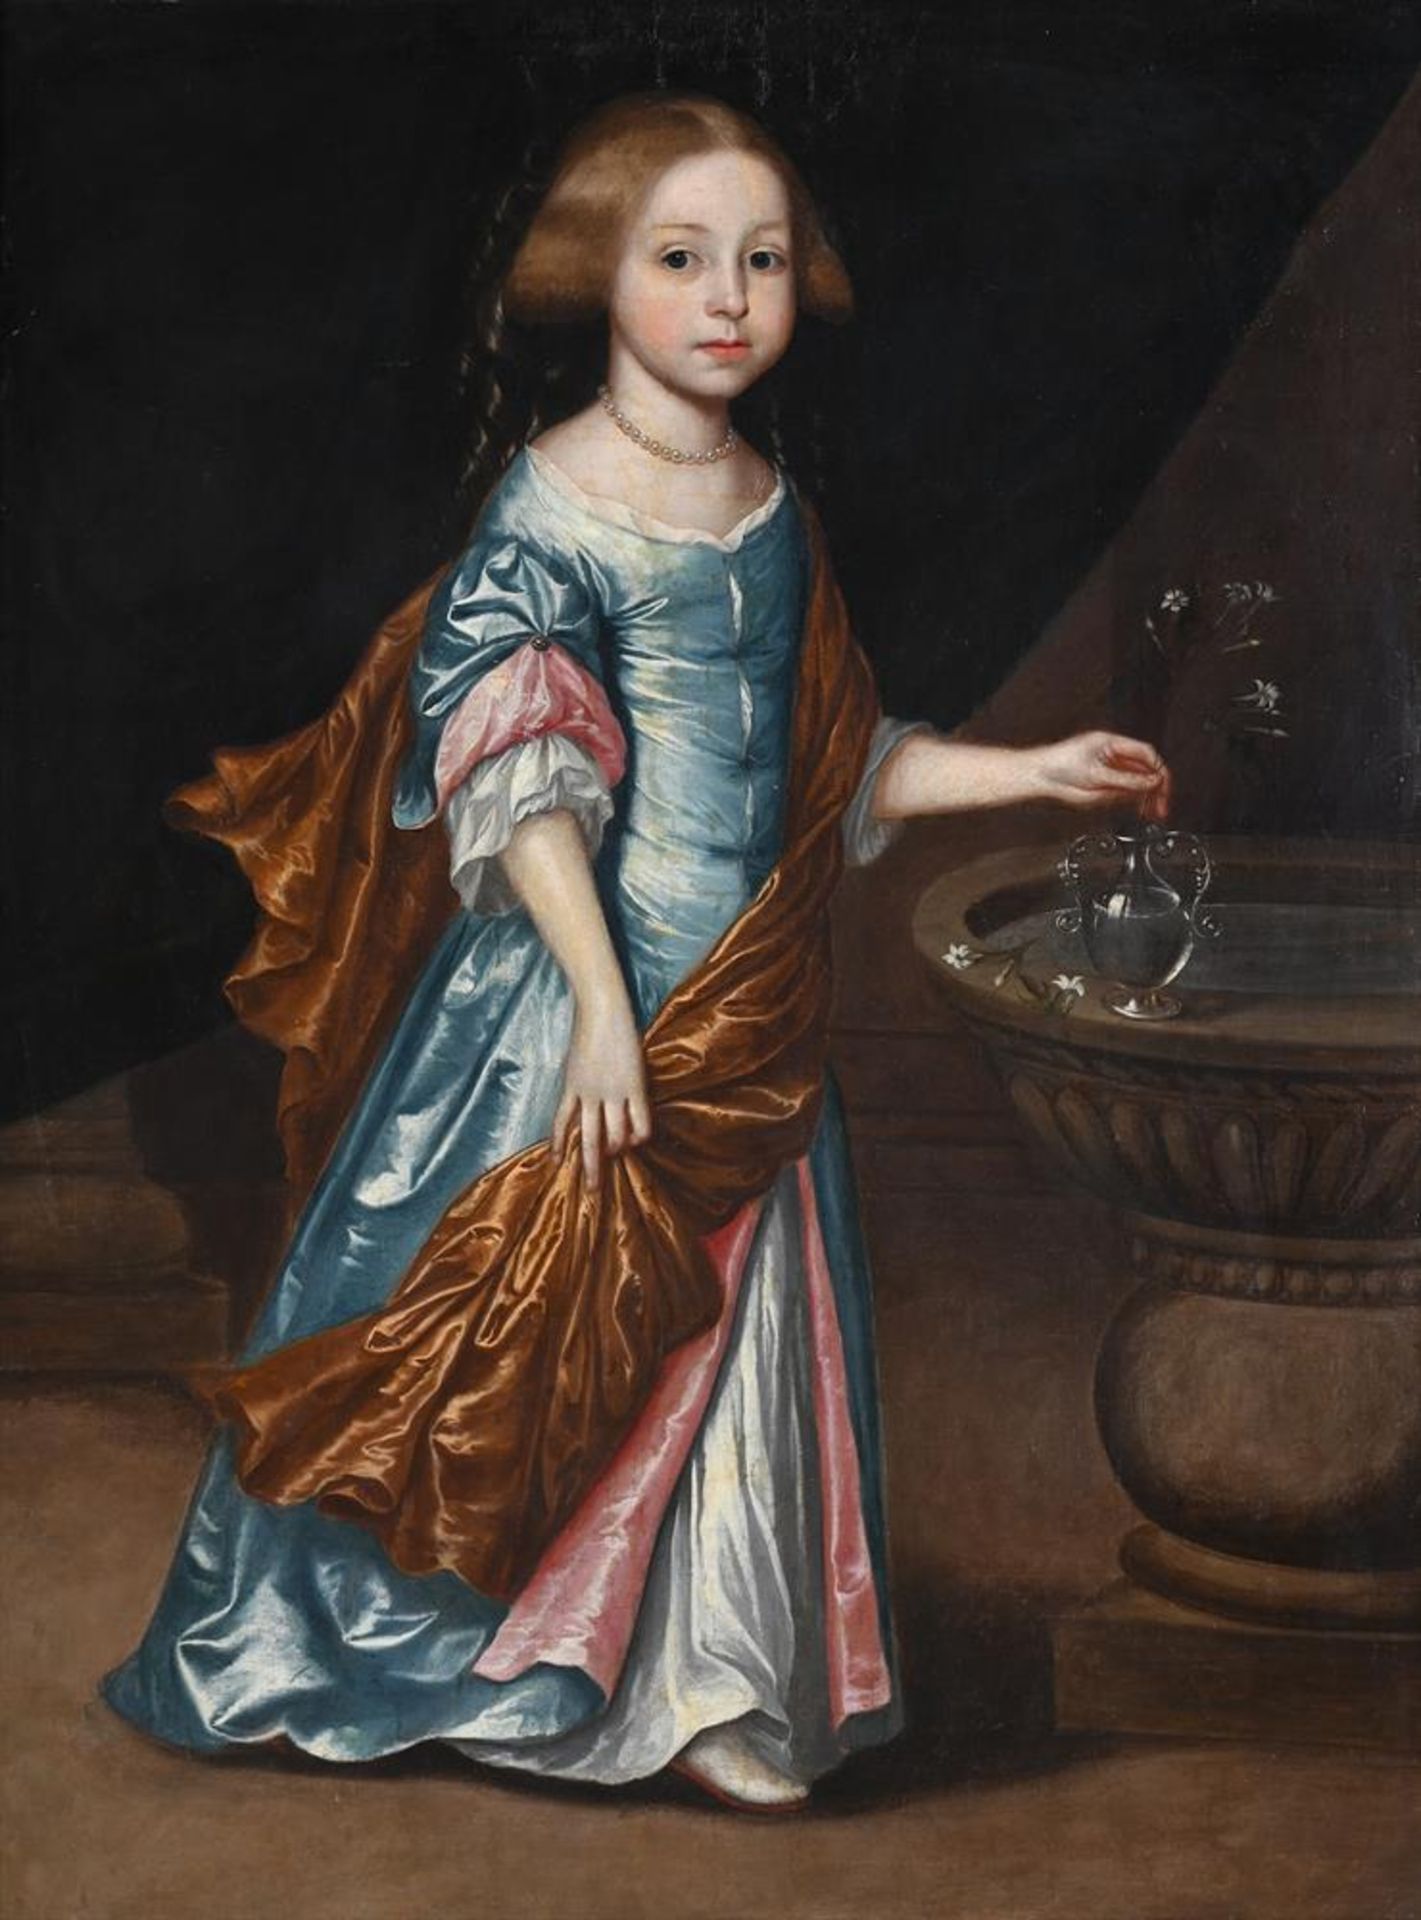 FOLLOWER OF SIR PETER LELY, PORTRAIT OF A CHILD IN A TURQUOISE DRESS